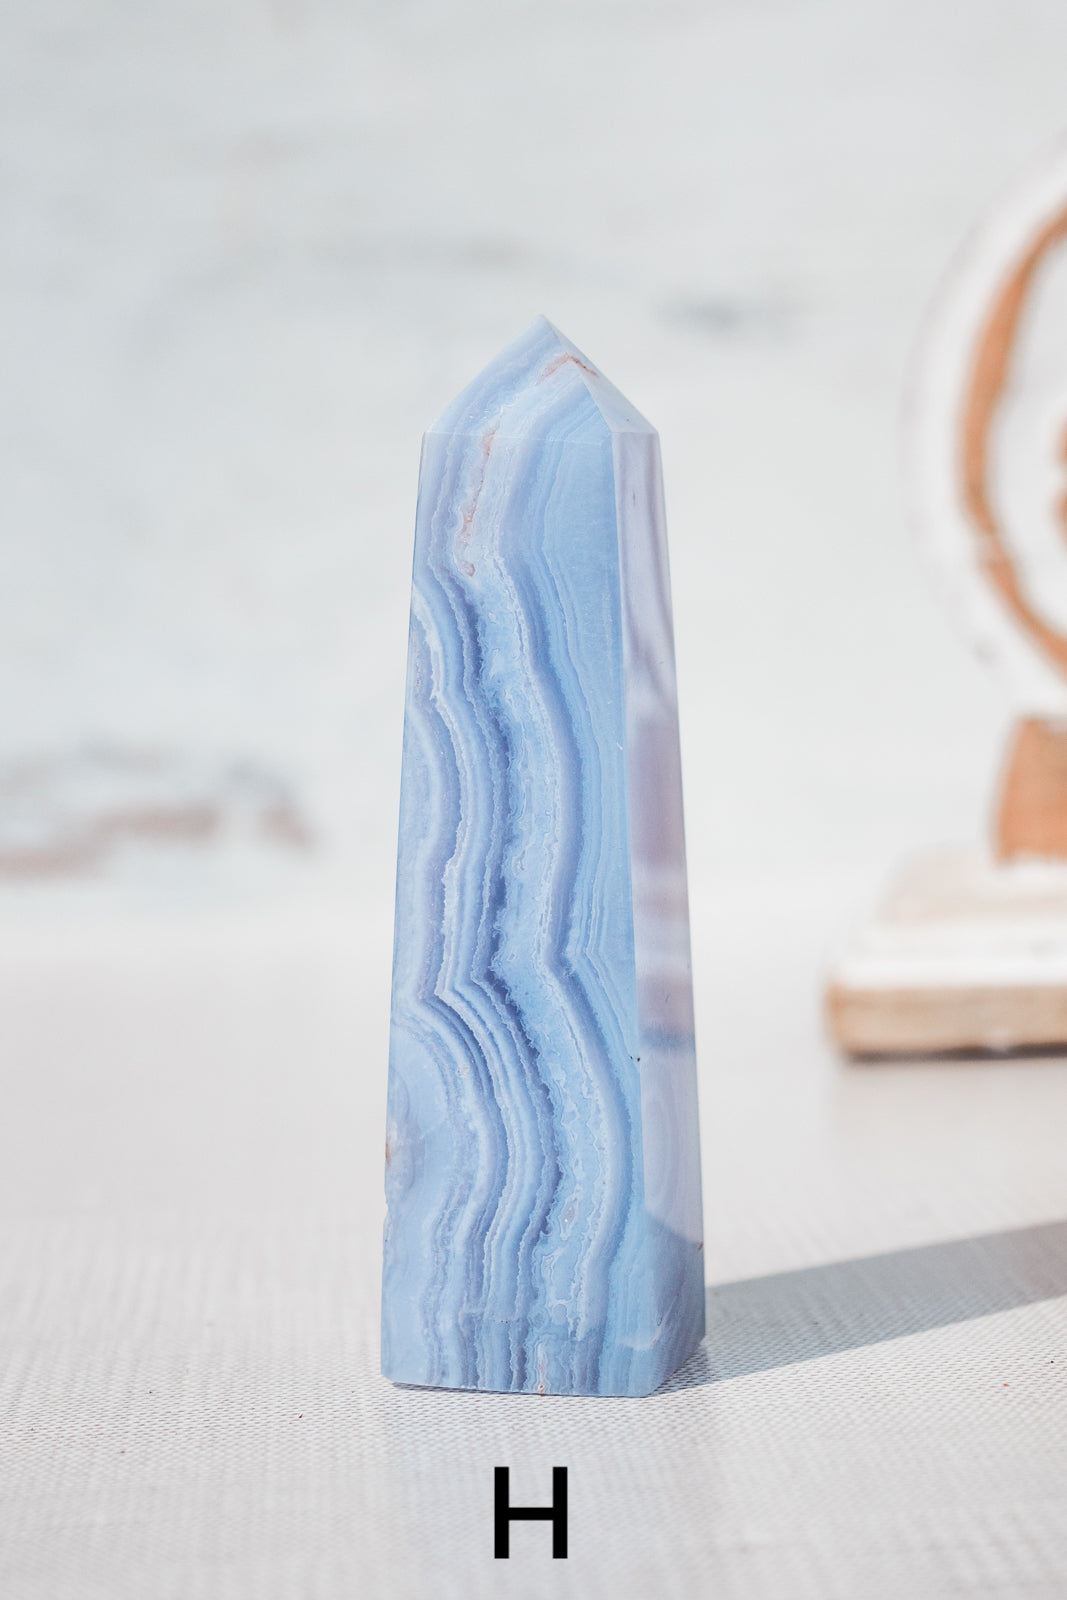 blue lace agate crystal point h